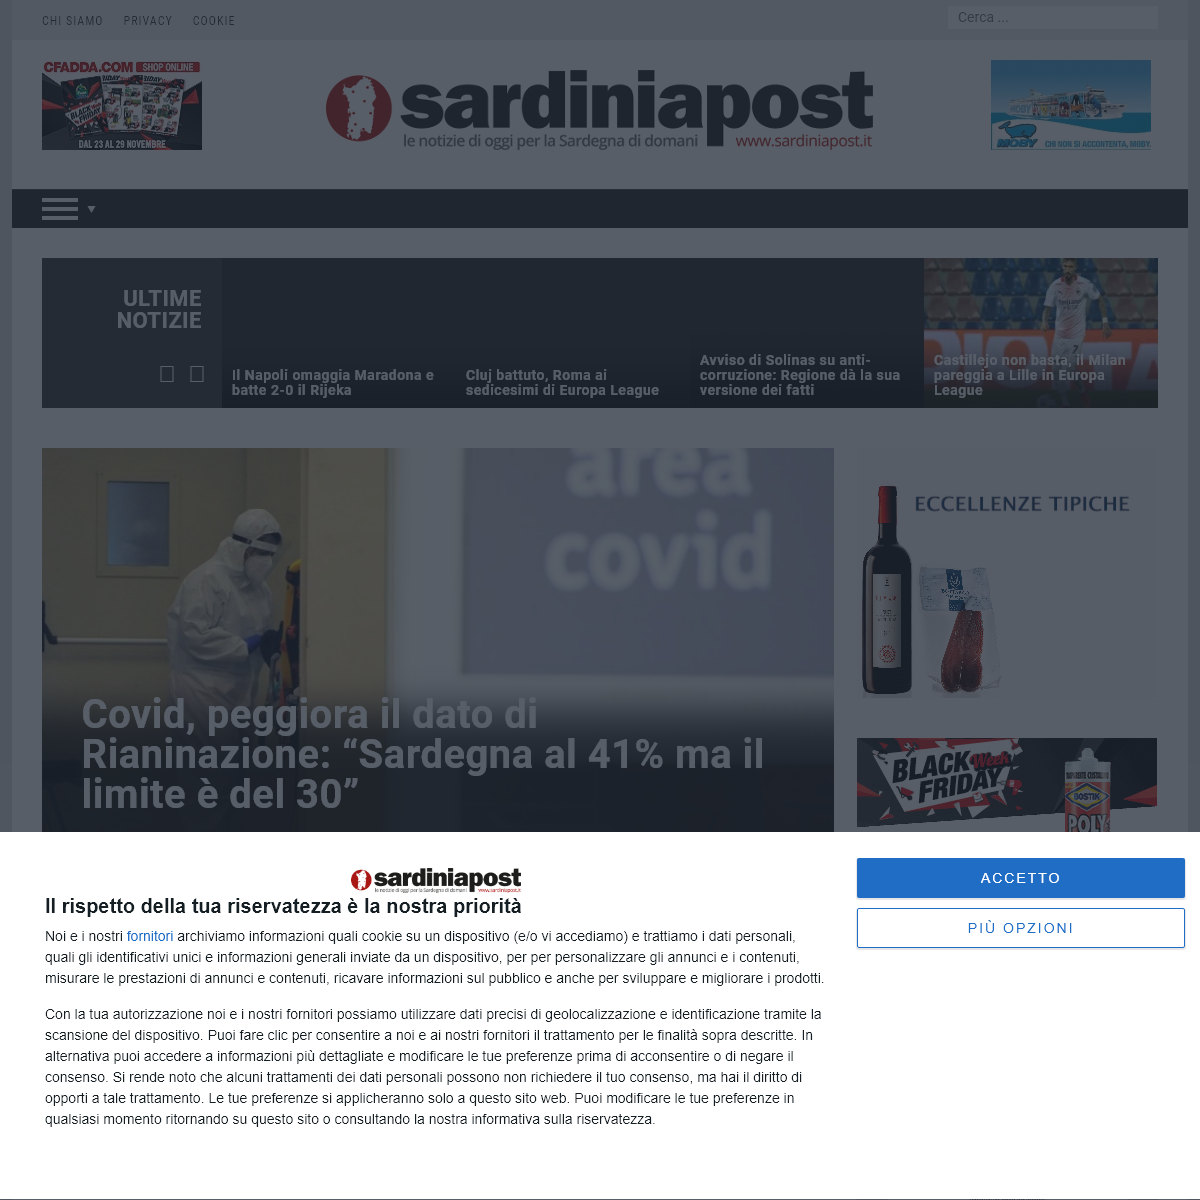 A complete backup of sardiniapost.it